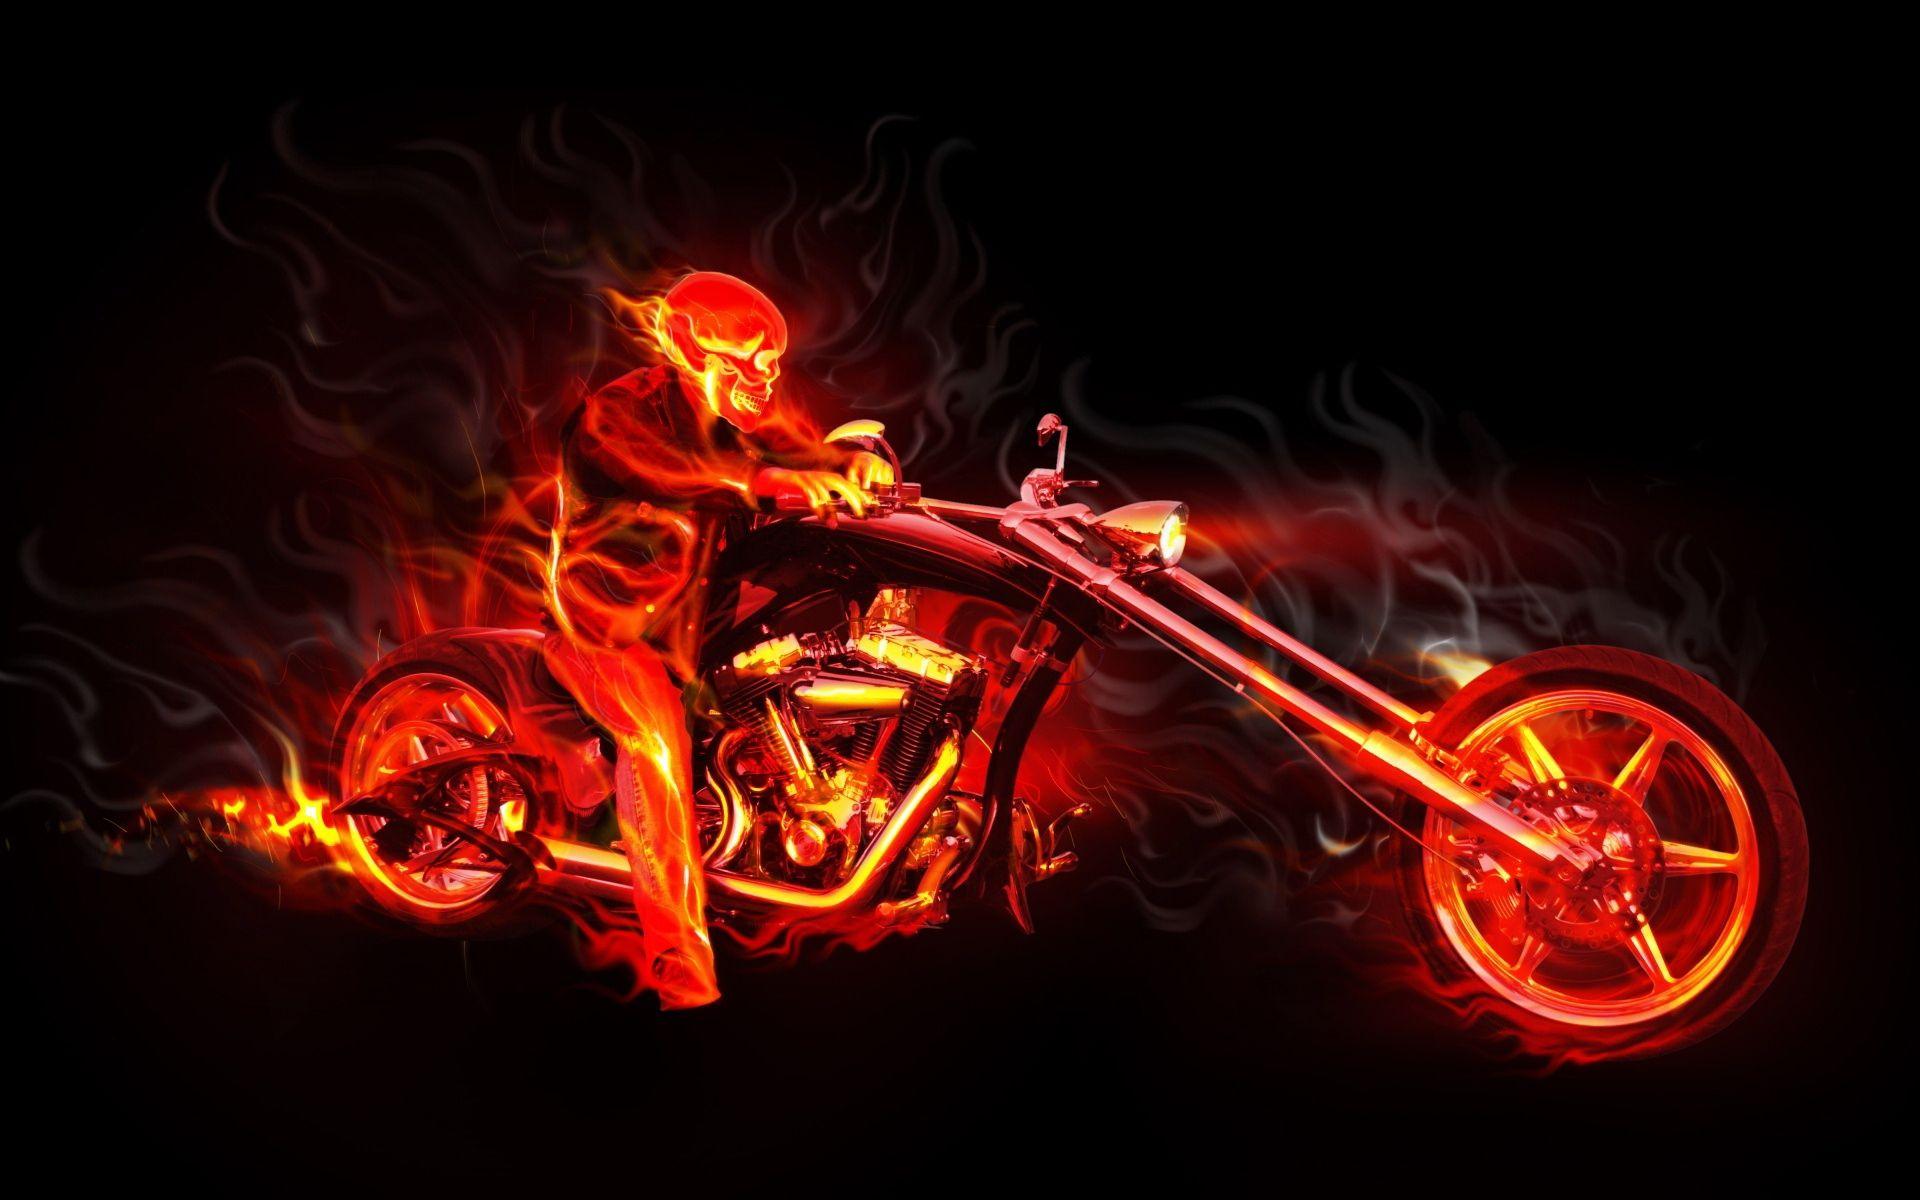 Black Fire Hell Rider On Motorbike 947047 Wallpapers wallpapers